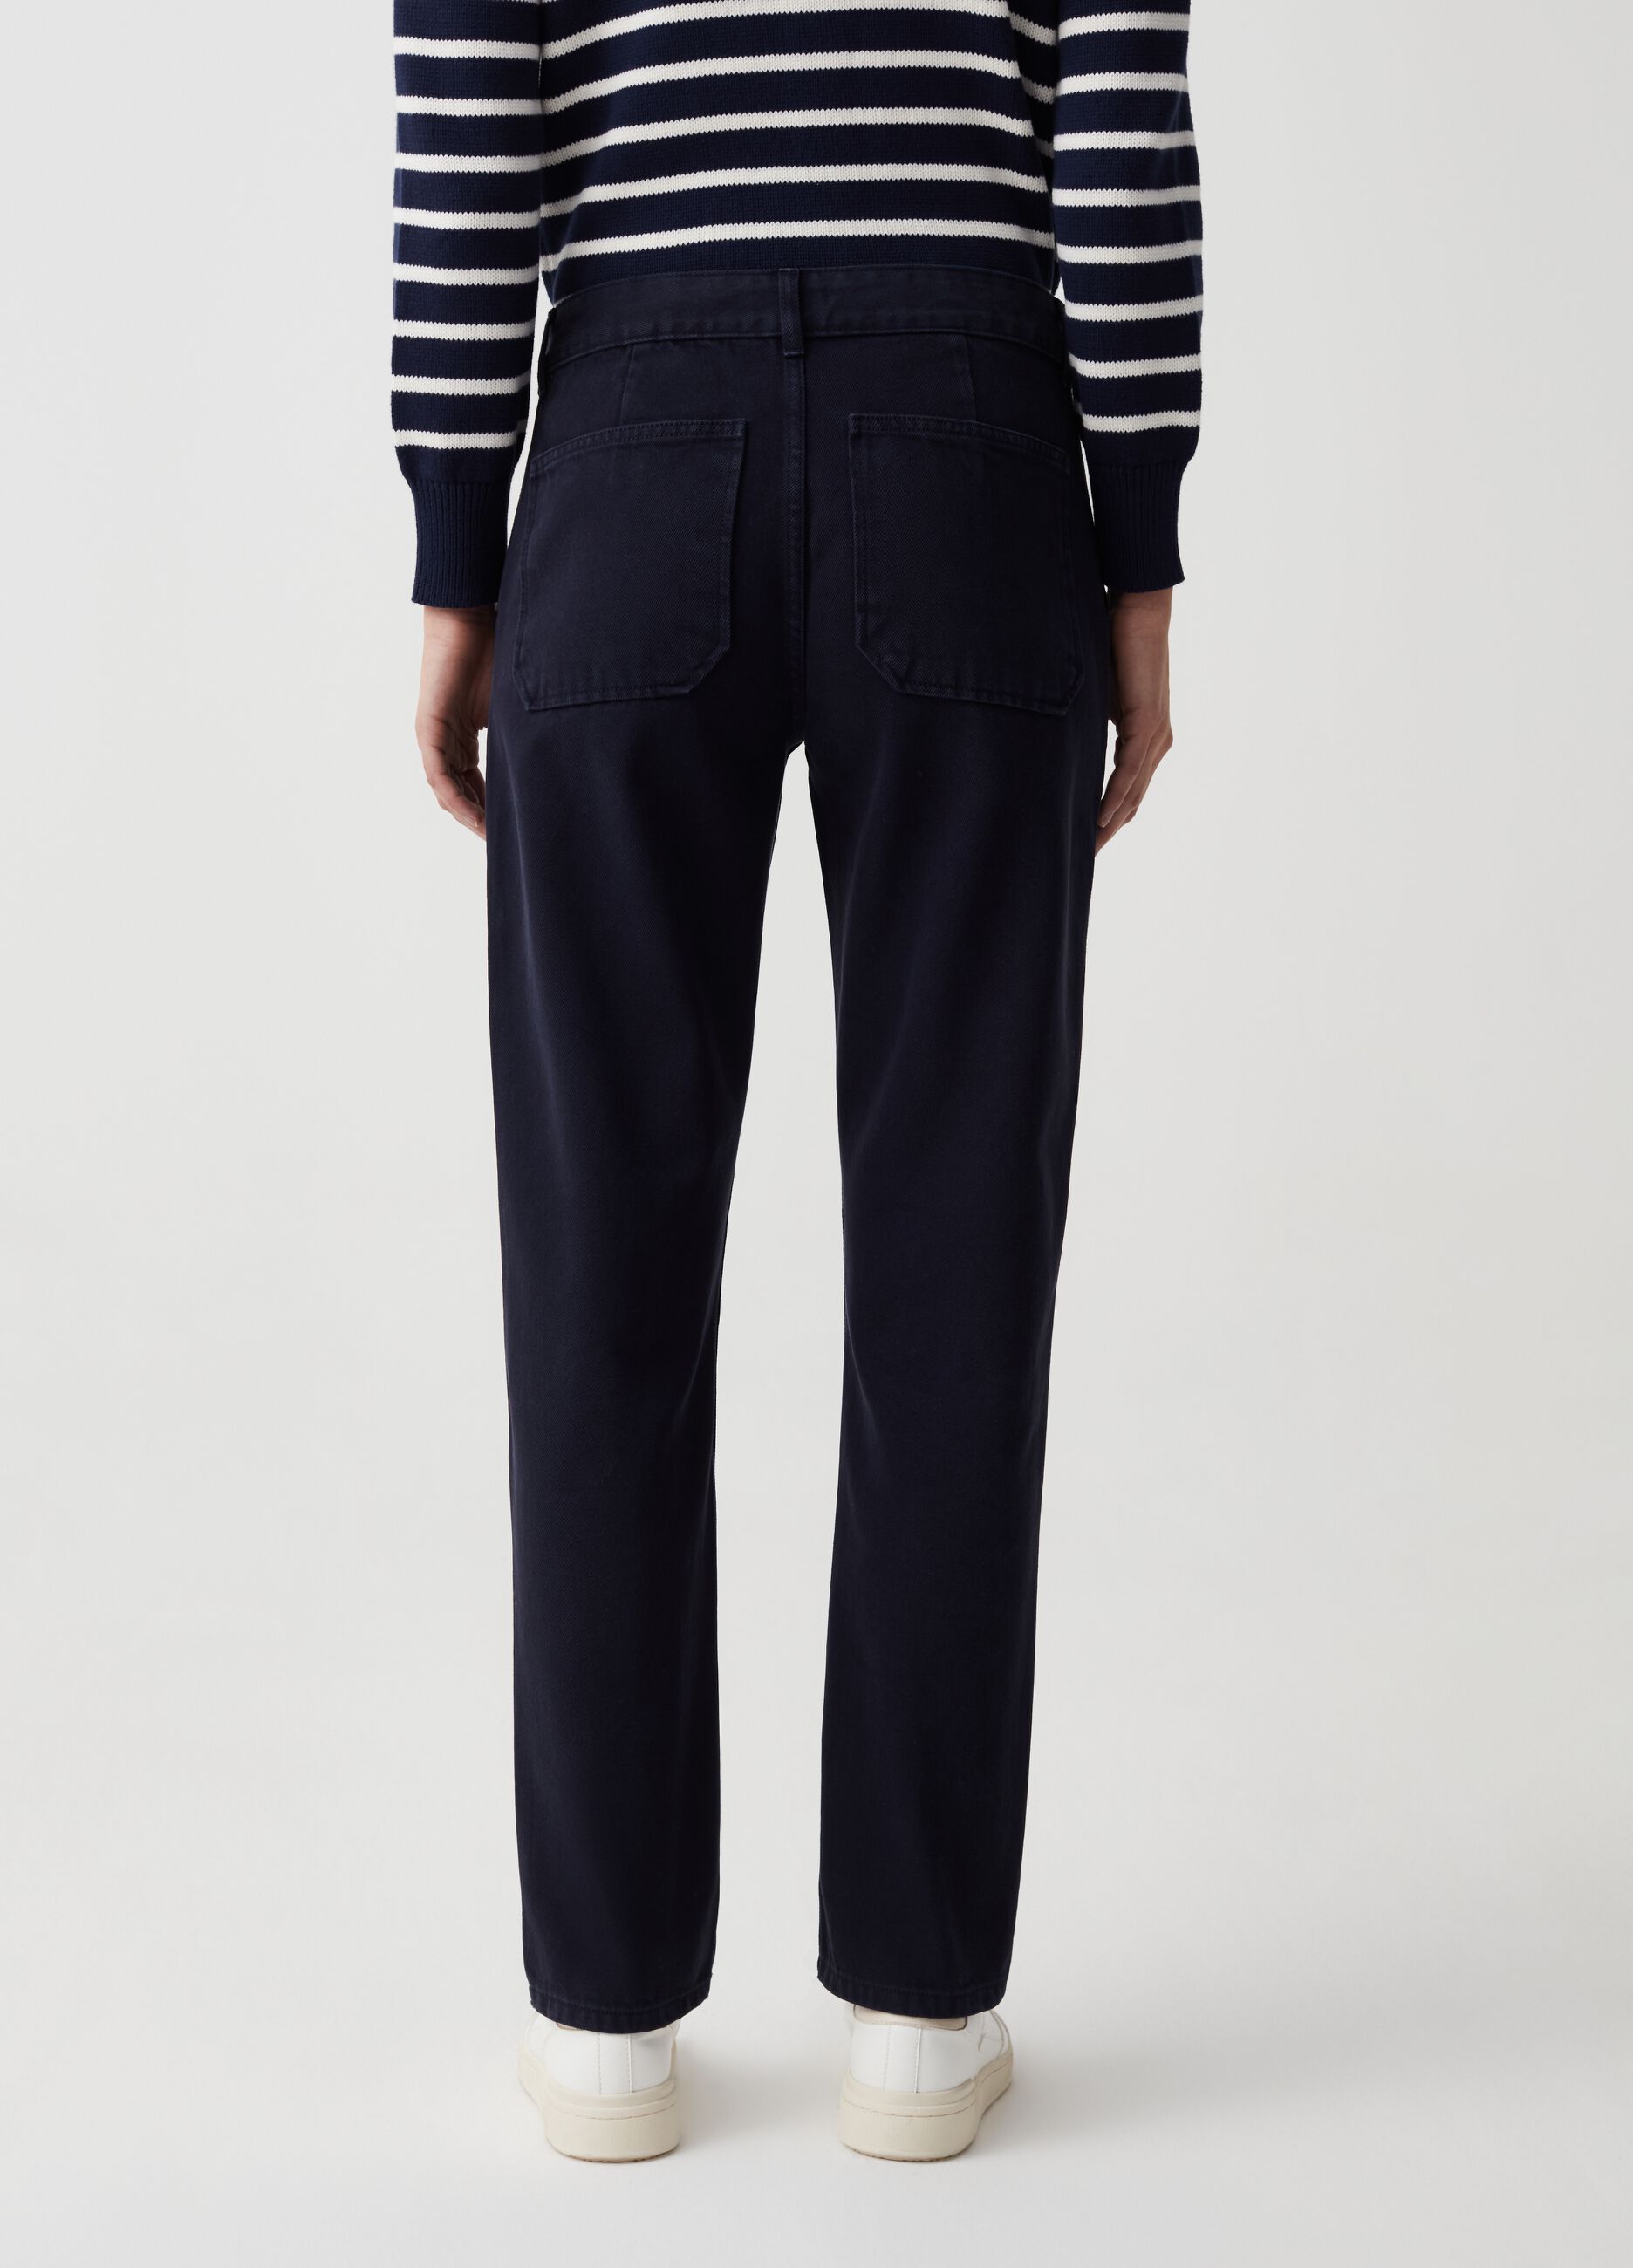 Straight-fit, cotton trousers